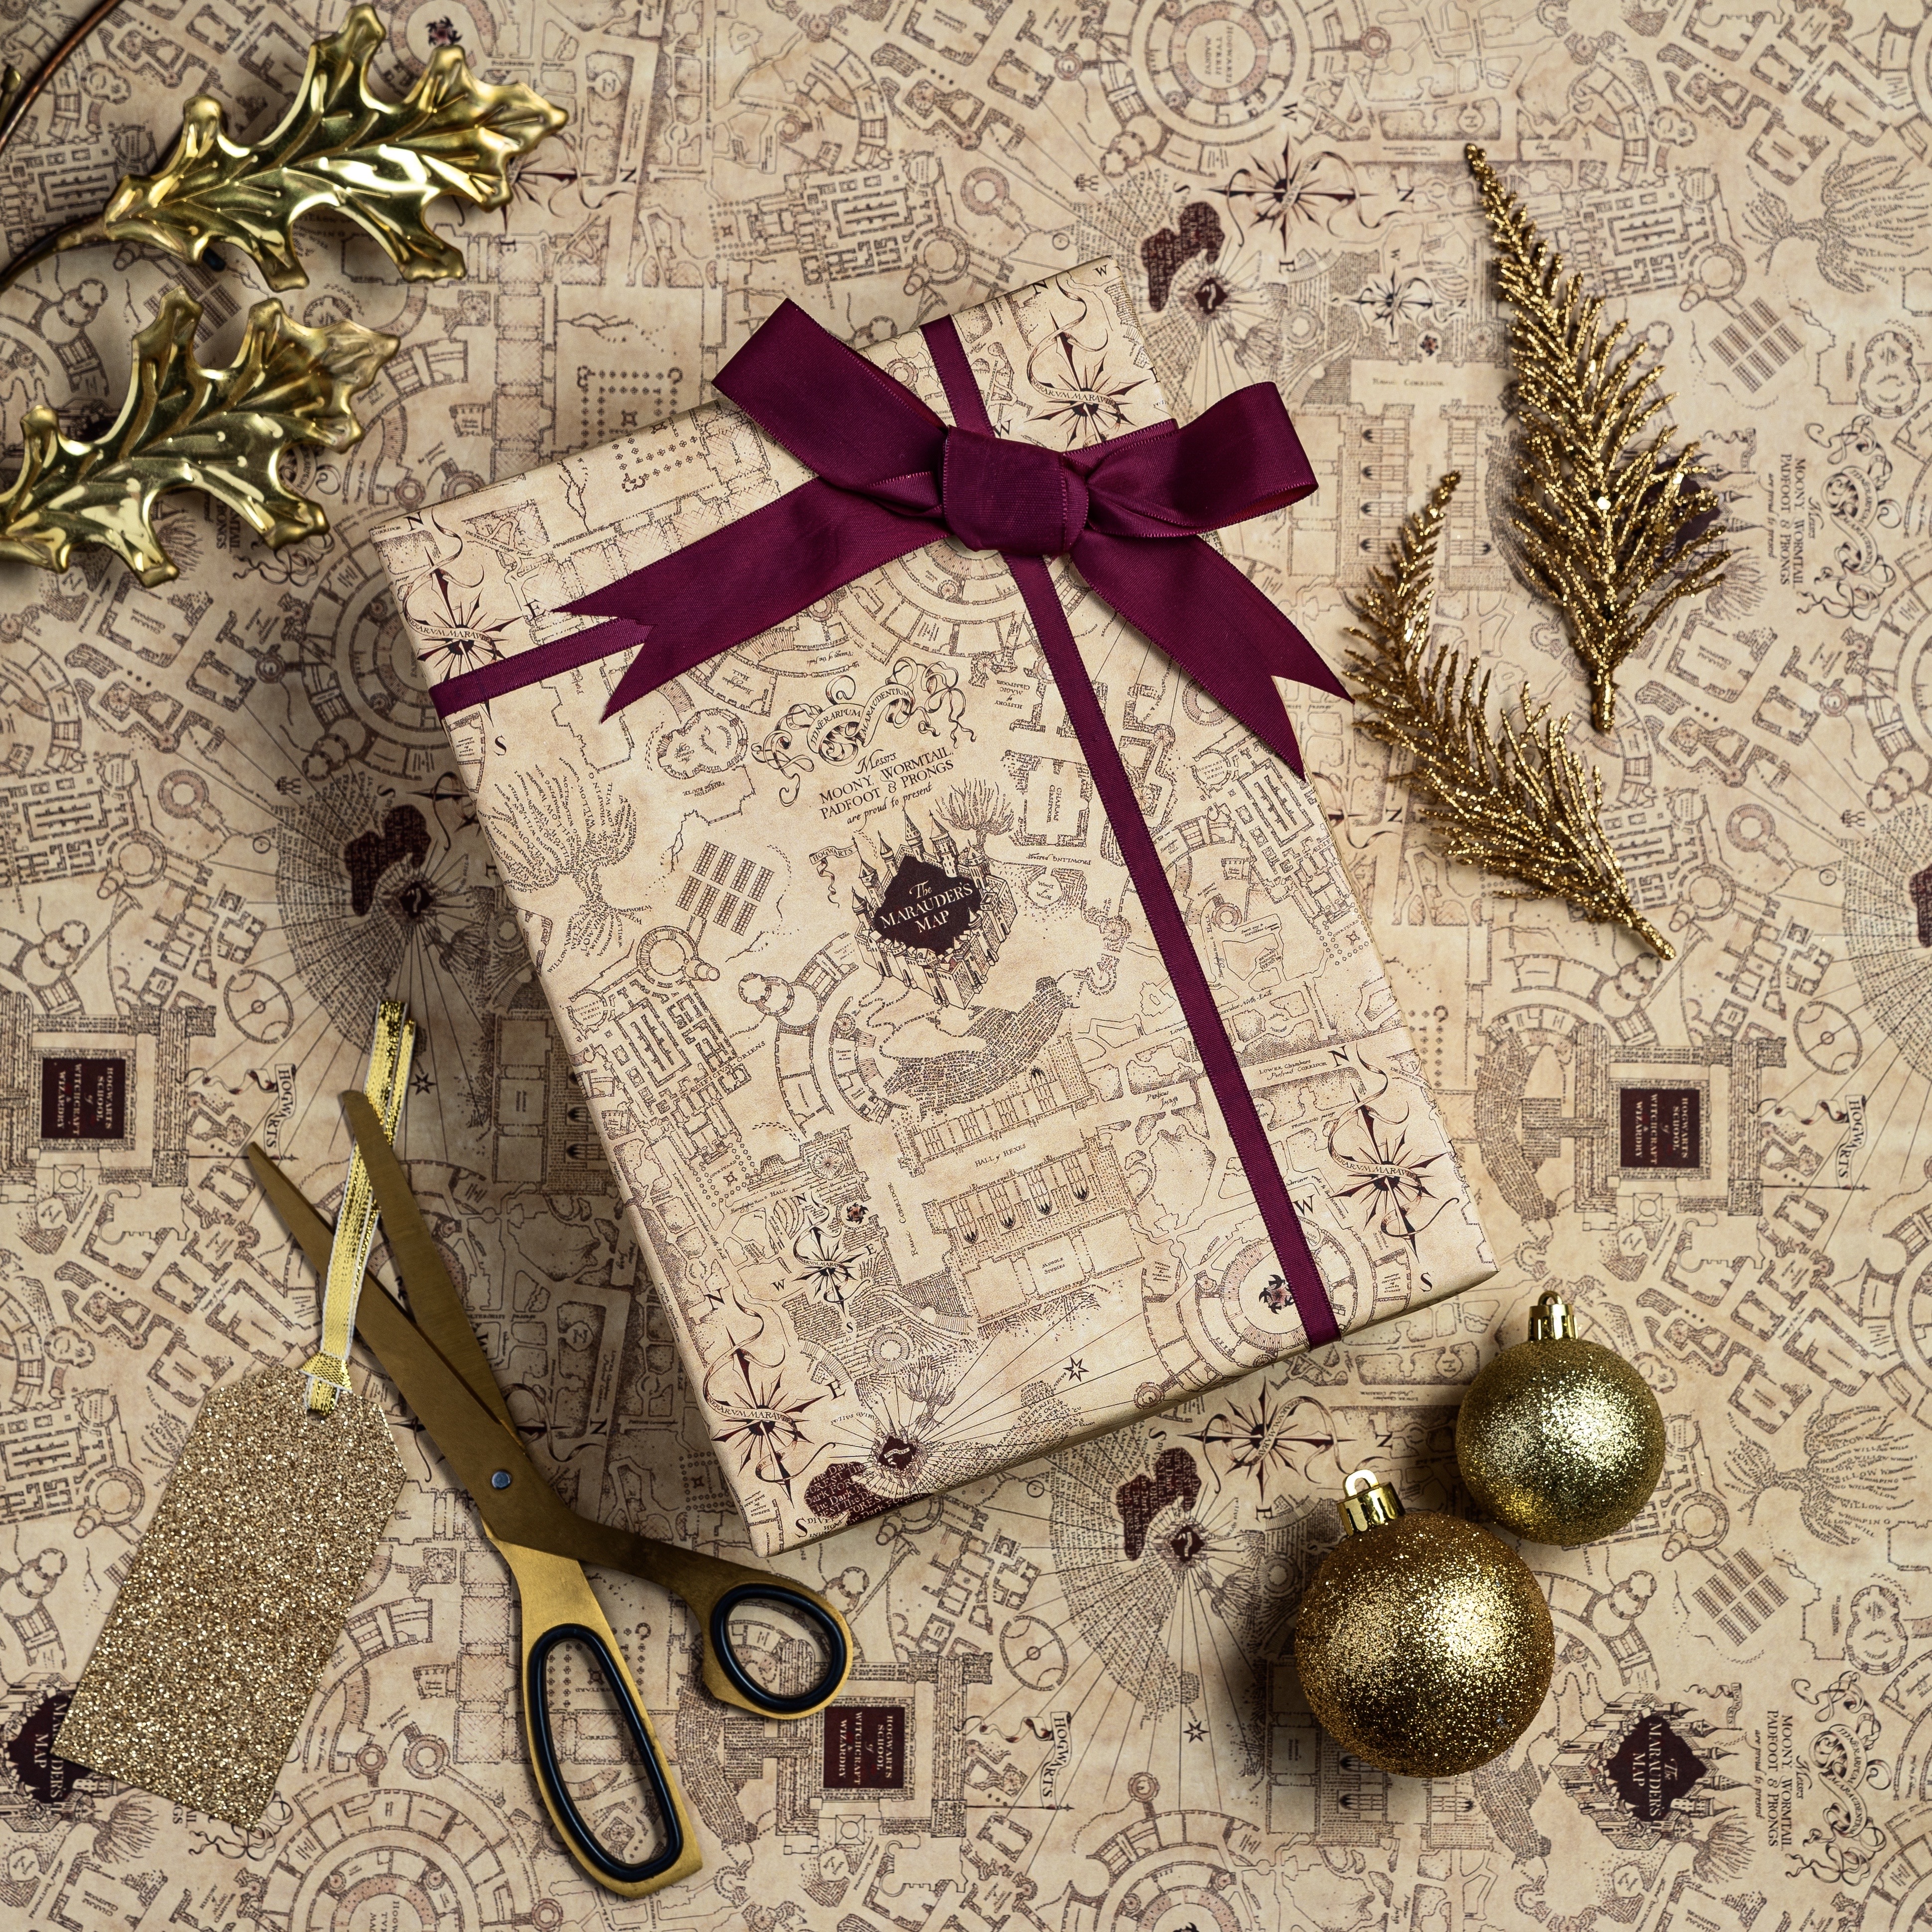 Explore Hogwarts with this stunning Marauder’s Map gift wrap.